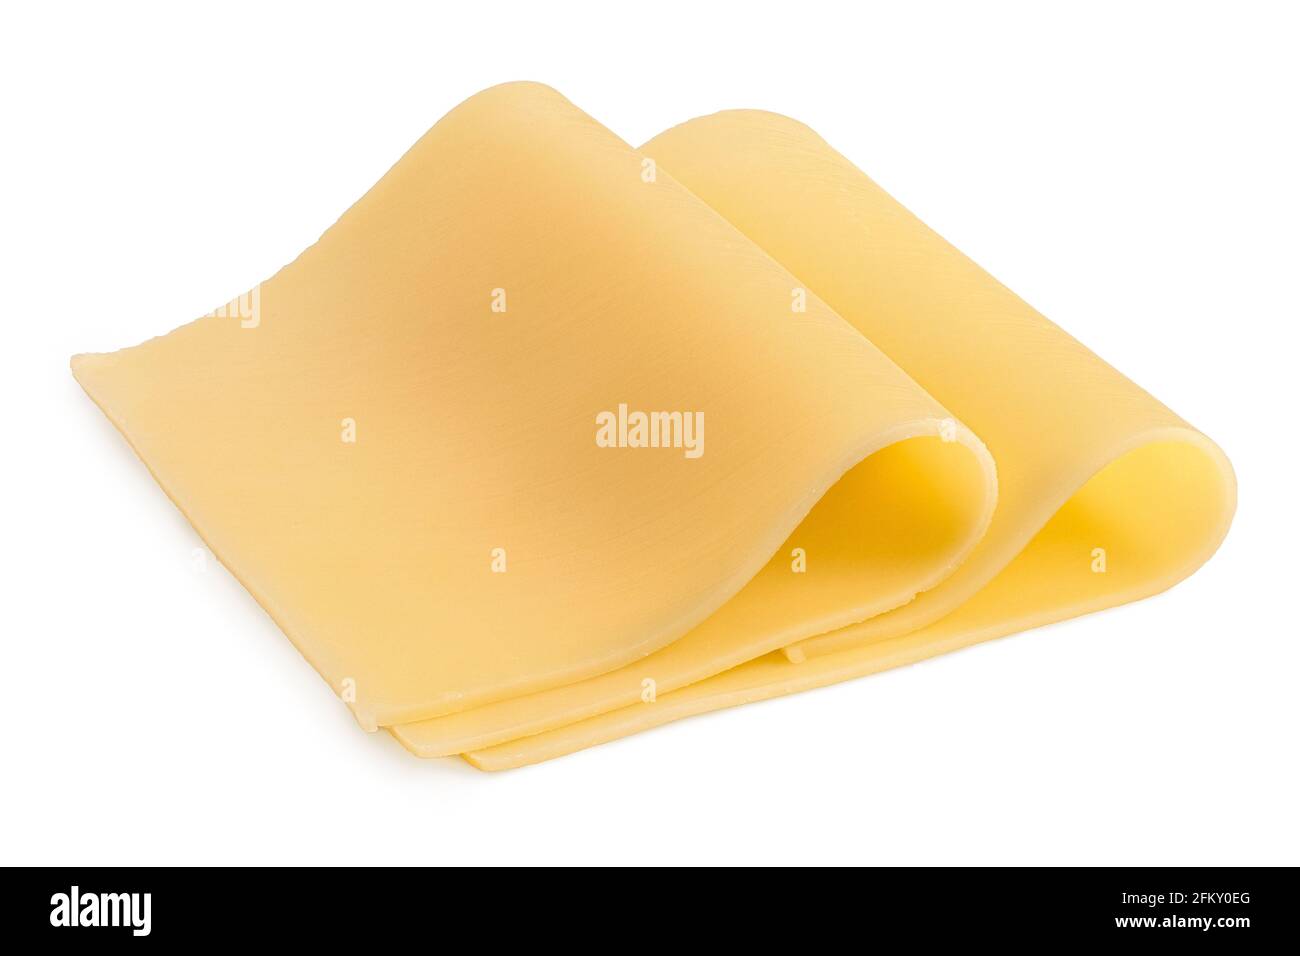 Two folded thin slices of yellow cheese isolated on white. Stock Photo